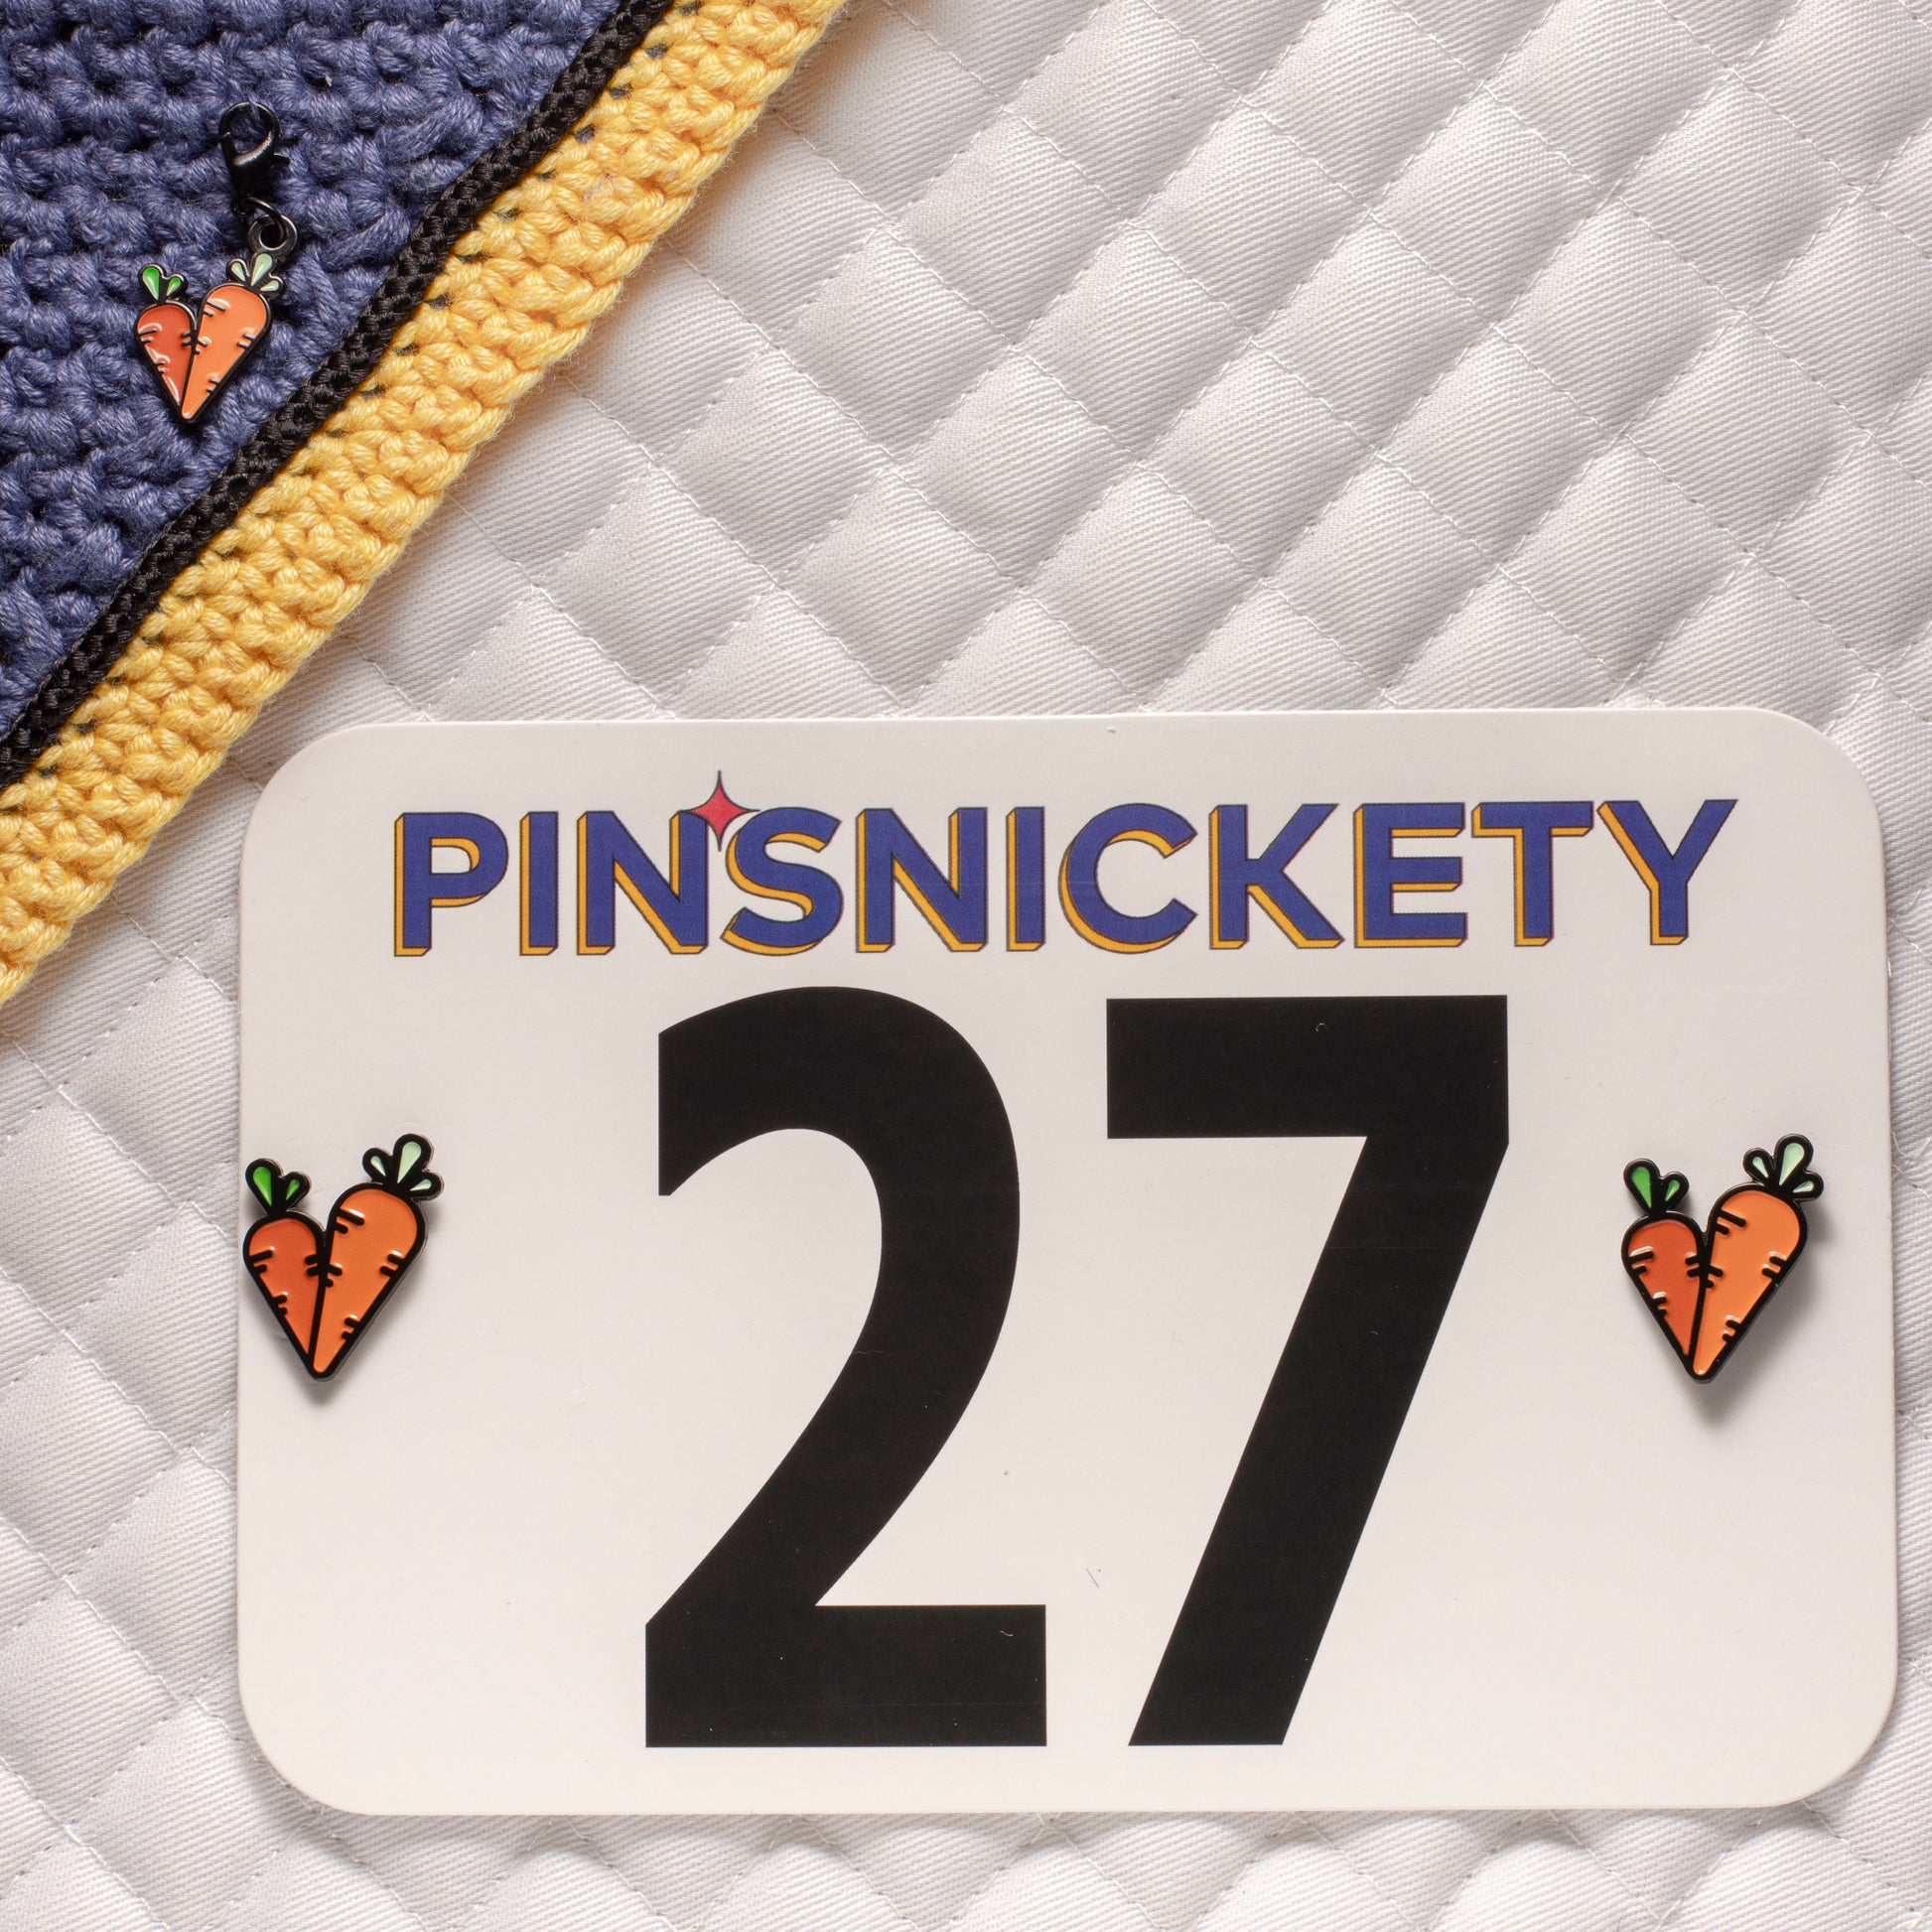 pinsnickety carrots matching set, with a carrots bridle charm on a bonnet and carrots horse show number pins on a saddle pad